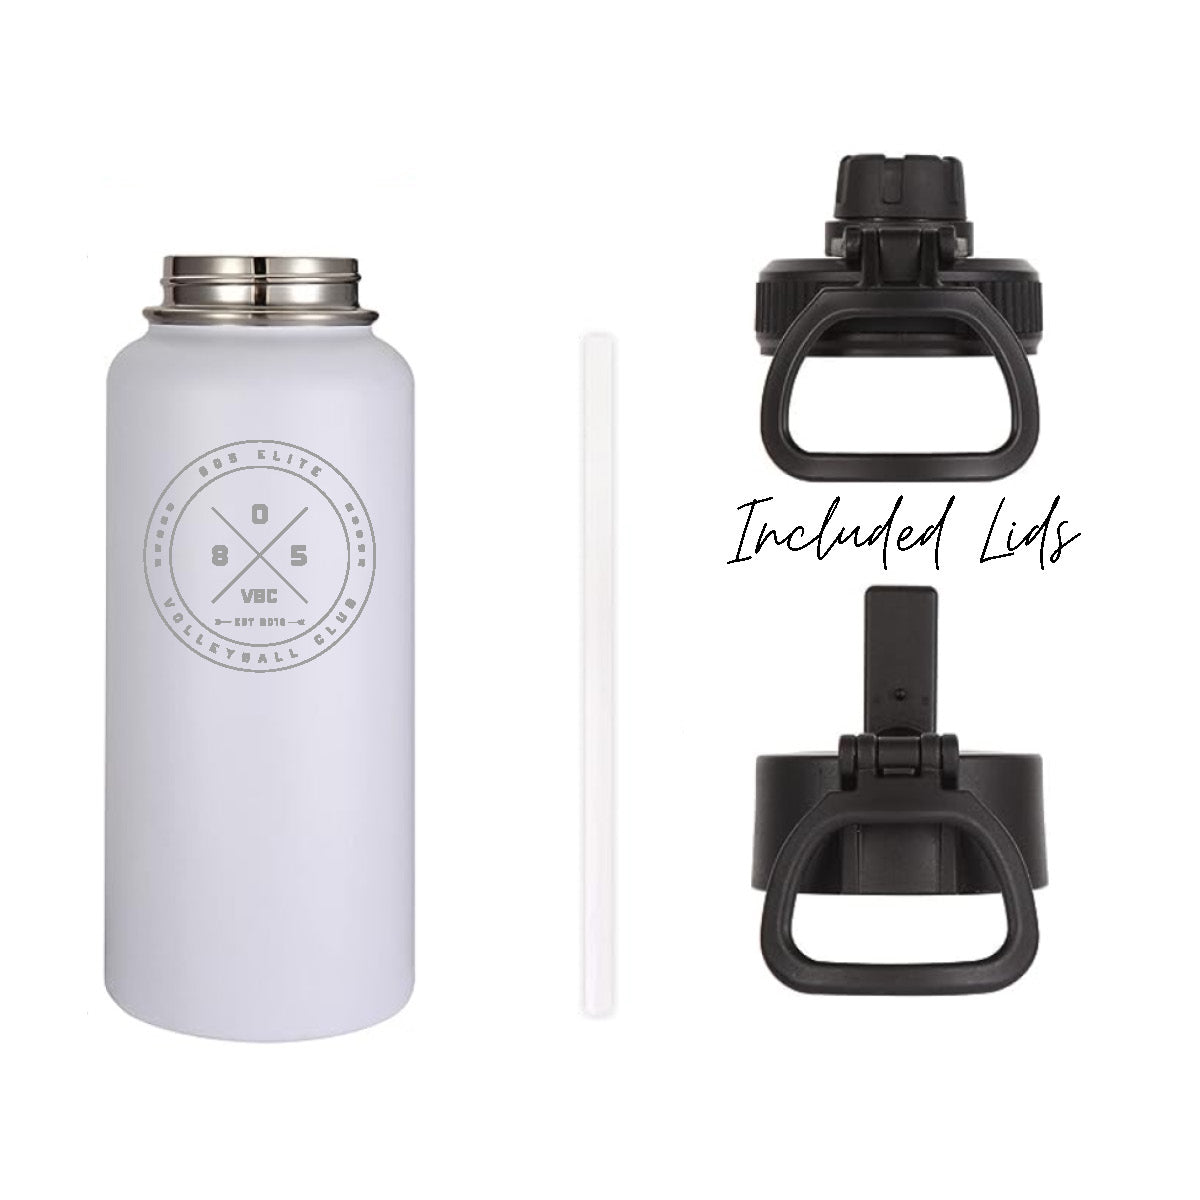 White insulated water with engraved club logo and included accessories pictured.